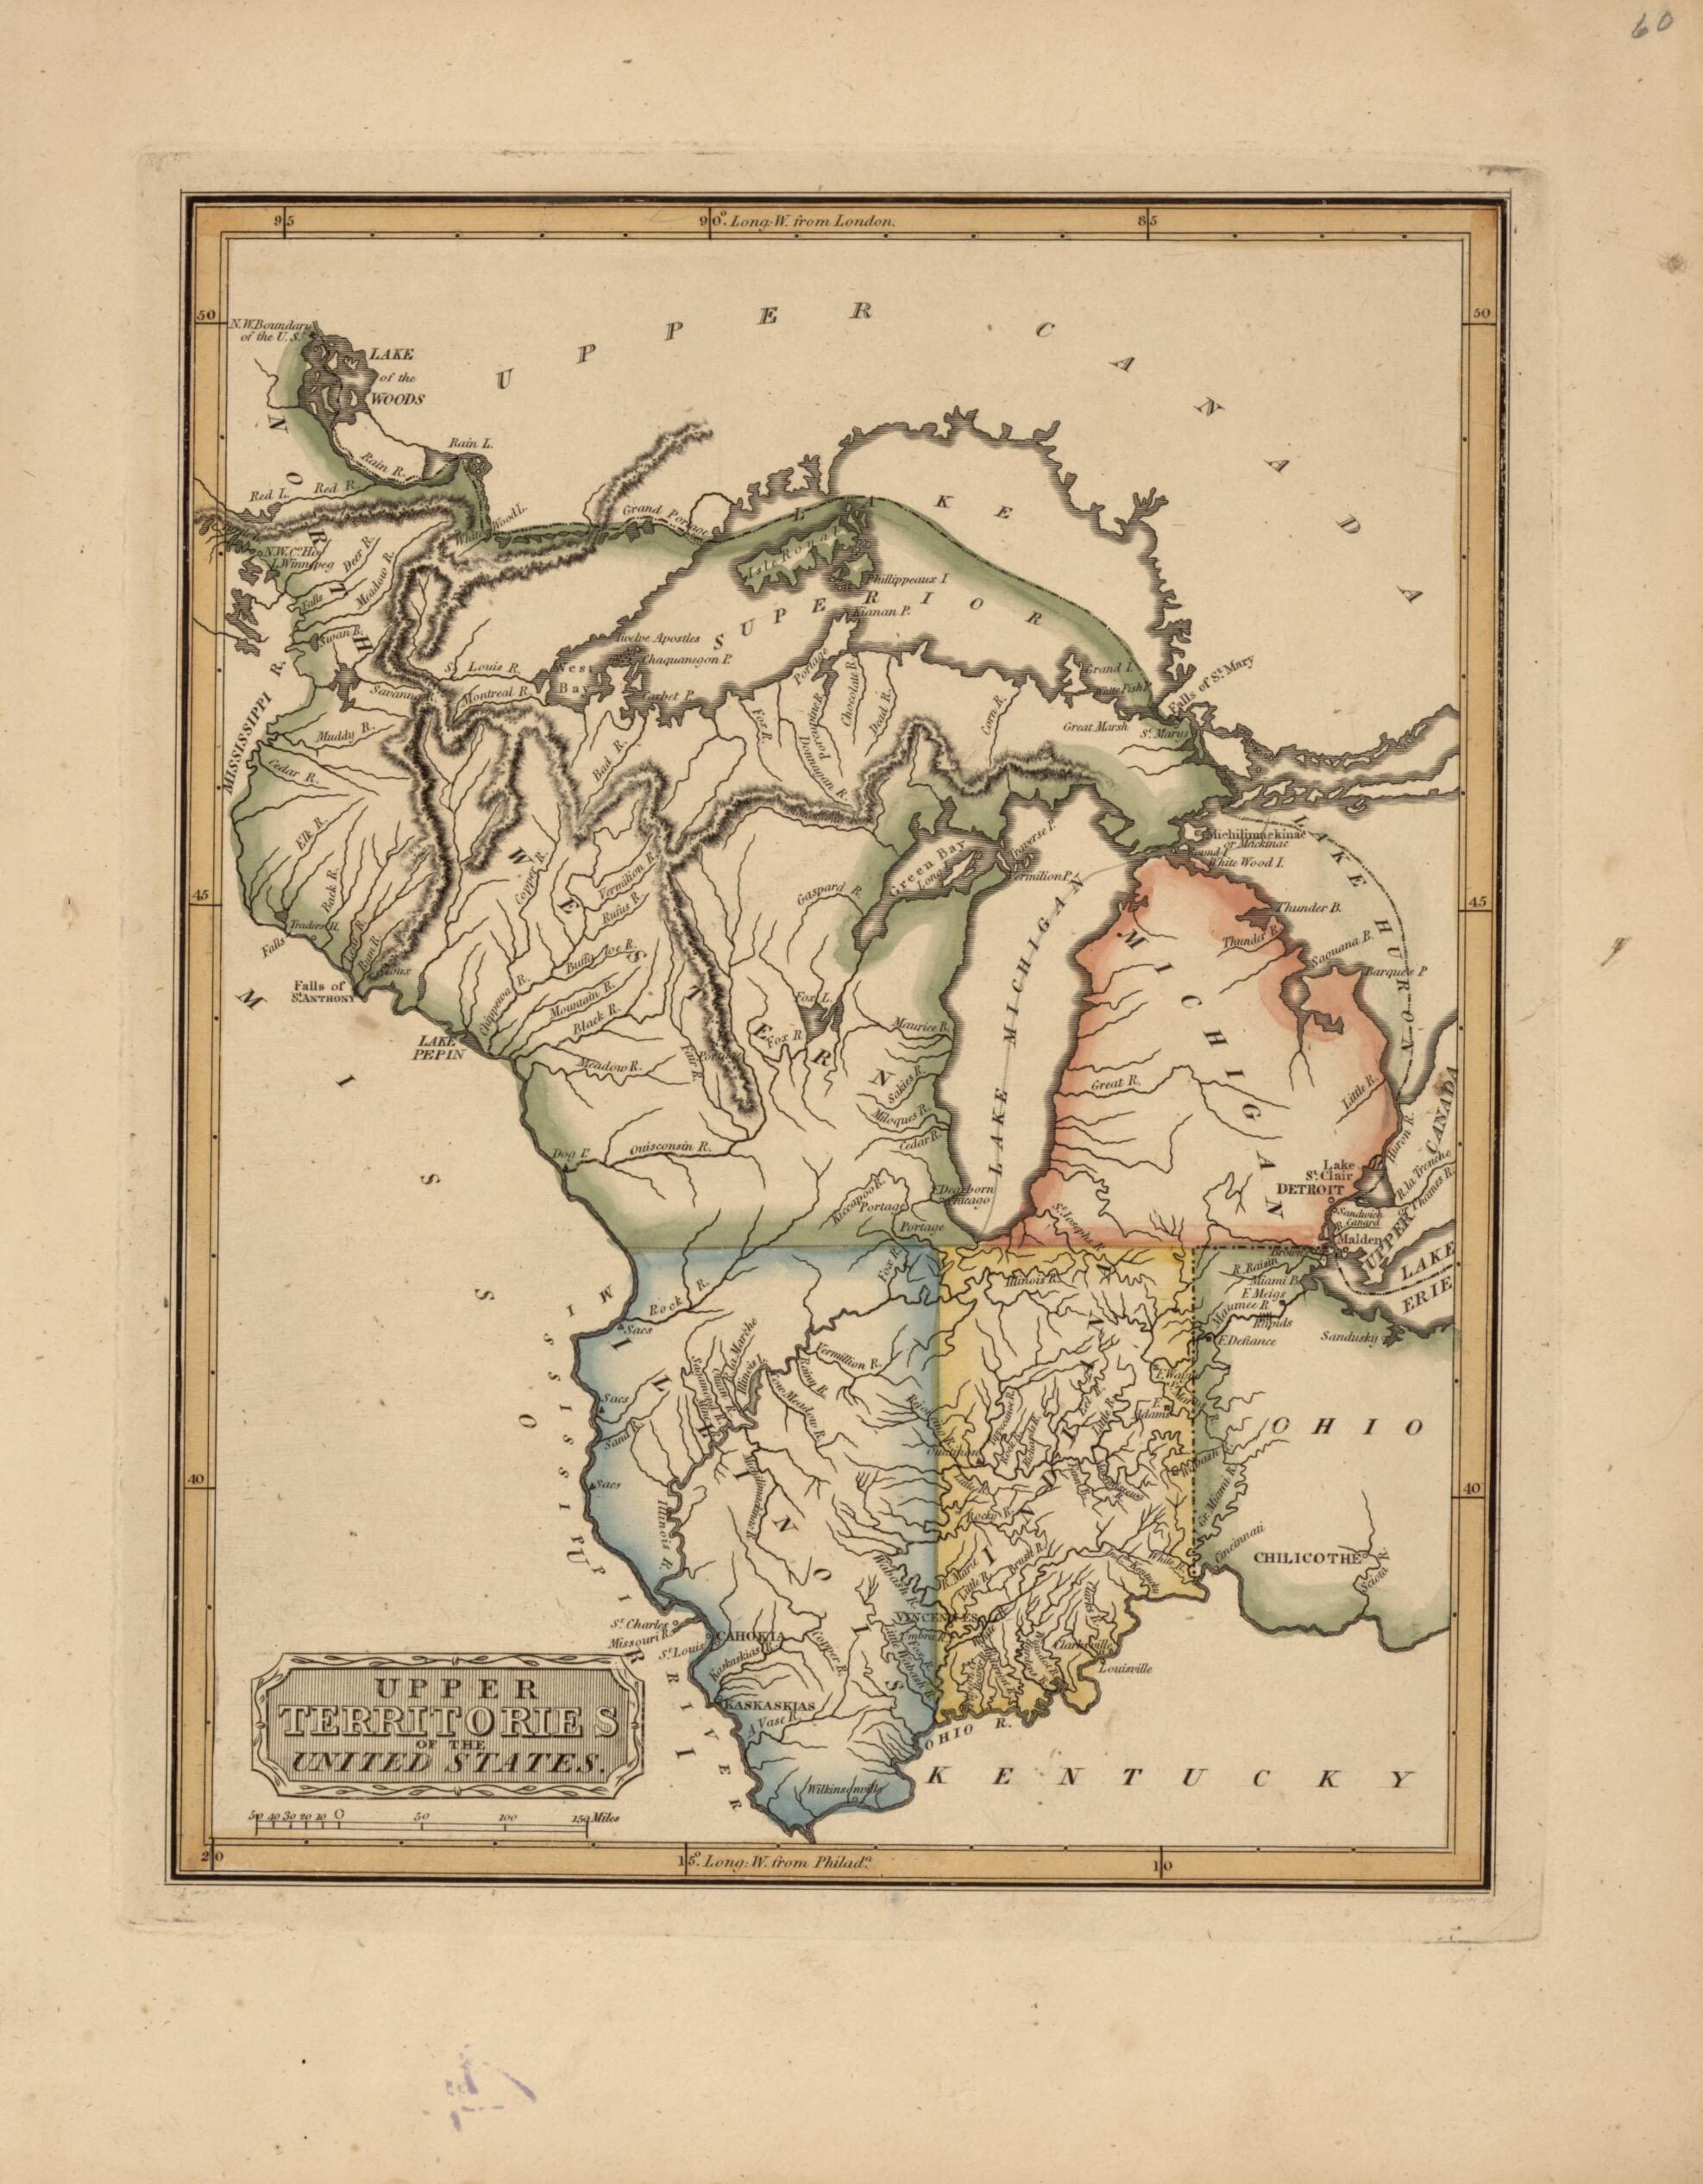 This old map of Upper Territories of the United States from a New and Elegant General Atlas, Containing Maps of Each of the United States  from 1817 was created by Henry Schenck Tanner in 1817